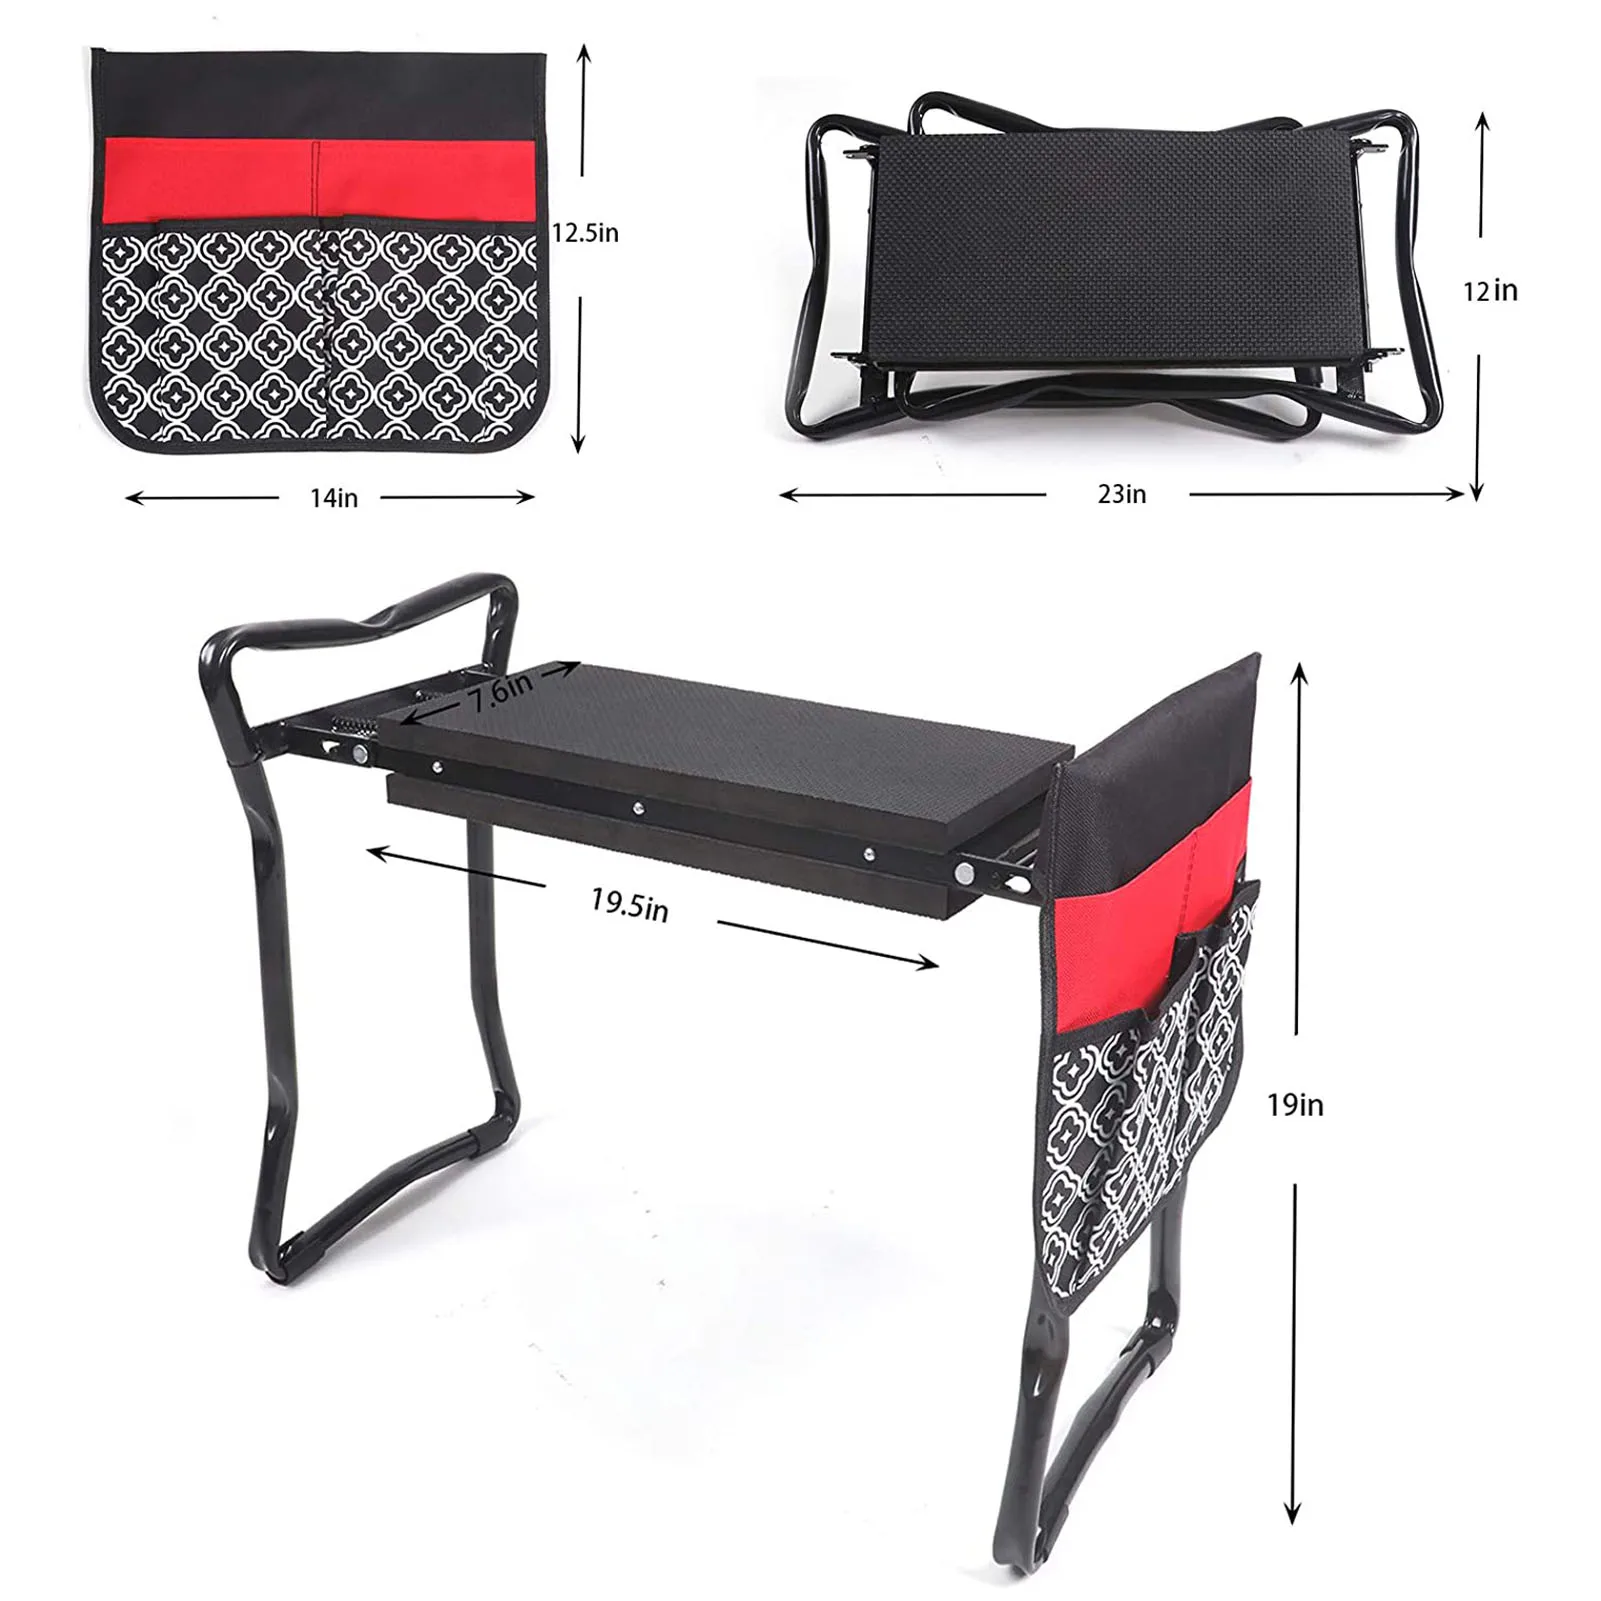 Multi Foldable Garden Kneeler Tool With 2 Storage Pouch Portable Garden Kneeling Chair Pad Pocket Storage Pocket Gardening Tool